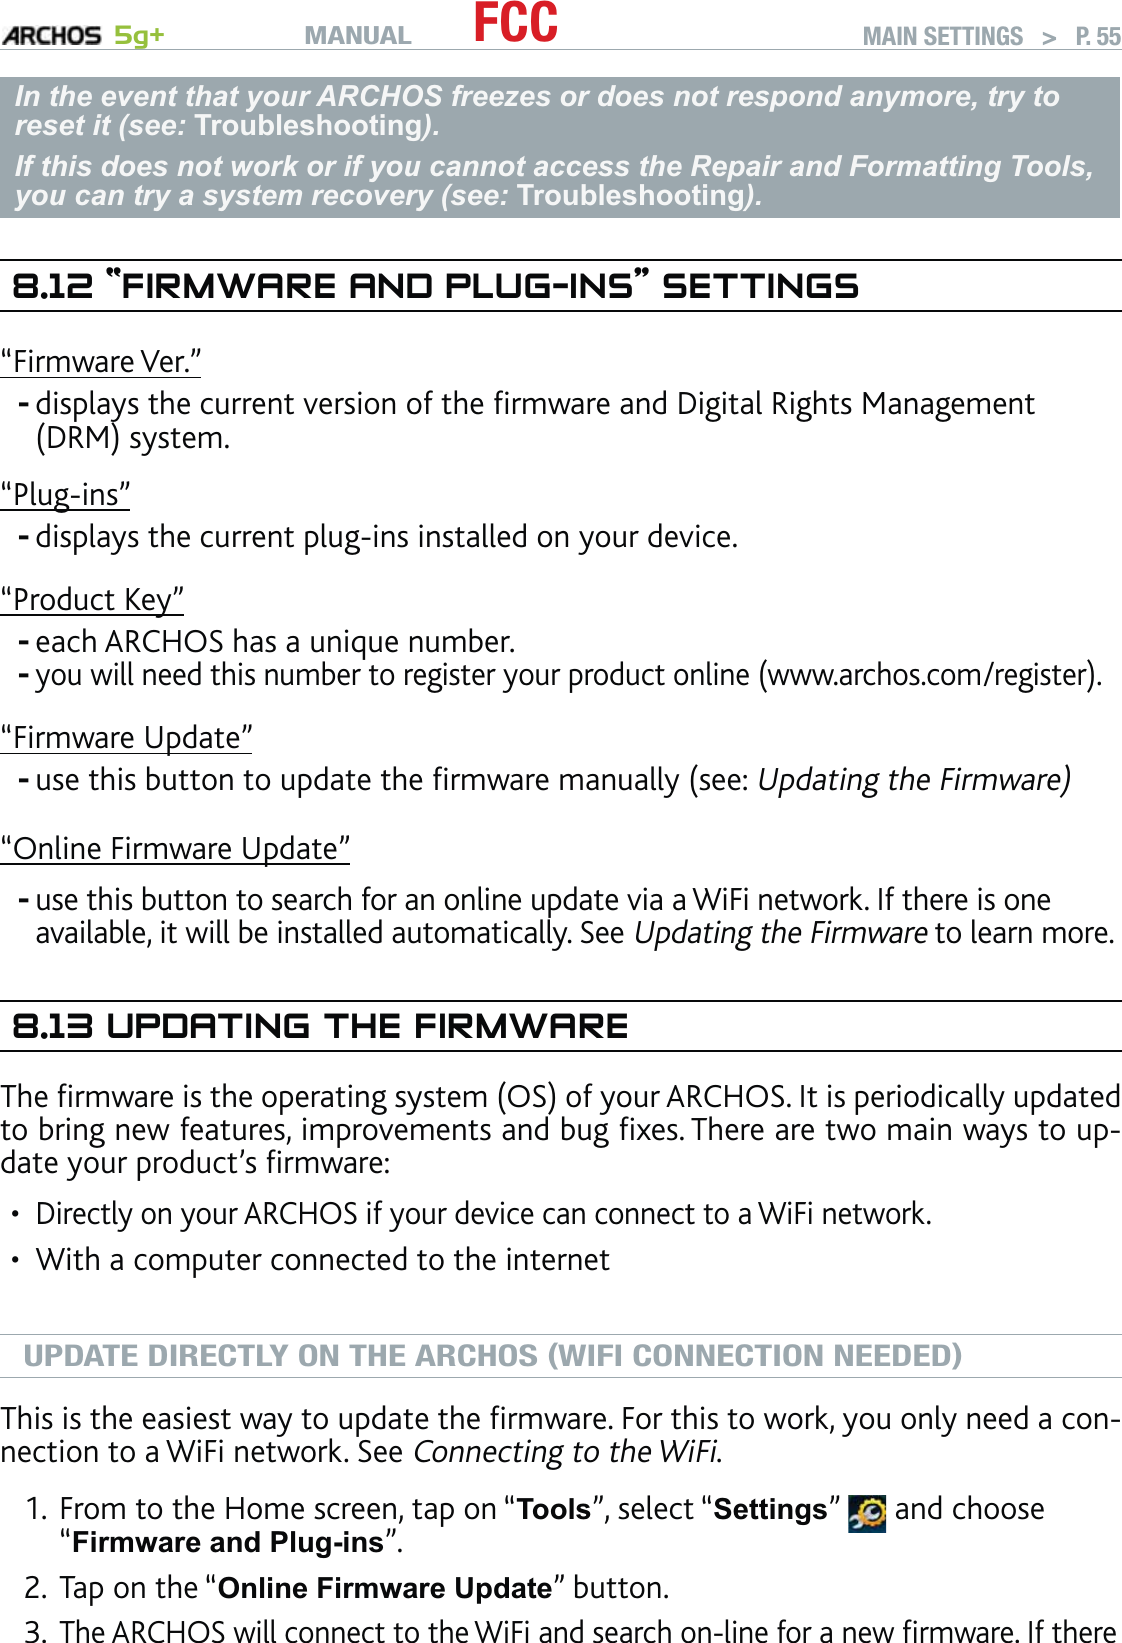 MANUAL 5g+ FCC MAIN SETTINGS   &gt;   P. 55In the event that your ARCHOS freezes or does not respond anymore, try to reset it (see: Troubleshooting).If this does not work or if you cannot access the Repair and Formatting Tools, you can try a system recovery (see: Troubleshooting).8.12 “FIRMWARE AND PLUG-INS” SETTINGS“Firmware Ver.”displays the current version of the ﬁrmware and Digital Rights Management (DRM) system.“Plug-ins”displays the current plug-ins installed on your device.“Product Key”each ARCHOS has a unique number.you will need this number to register your product online (www.archos.com/register).“Firmware Update”use this button to update the ﬁrmware manually (see: Updating the Firmware)“Online Firmware Update”use this button to search for an online update via a WiFi network. If there is one available, it will be installed automatically. See Updating the Firmware to learn more.8.13 UPDATING THE FIRMWAREThe ﬁrmware is the operating system (OS) of your ARCHOS. It is periodically updated to bring new features, improvements and bug ﬁxes. There are two main ways to up-date your product’s ﬁrmware:Directly on your ARCHOS if your device can connect to a WiFi network.With a computer connected to the internetUPDATE DIRECTLY ON THE ARCHOS (WIFI CONNECTION NEEDED)This is the easiest way to update the ﬁrmware. For this to work, you only need a con-nection to a WiFi network. See Connecting to the WiFi.From to the Home screen, tap on “Tools”, select “Settings”   and choose “Firmware and Plug-ins”.Tap on the “Online Firmware Update” button. The ARCHOS will connect to the WiFi and search on-line for a new ﬁrmware. If there ------••1.2.3.